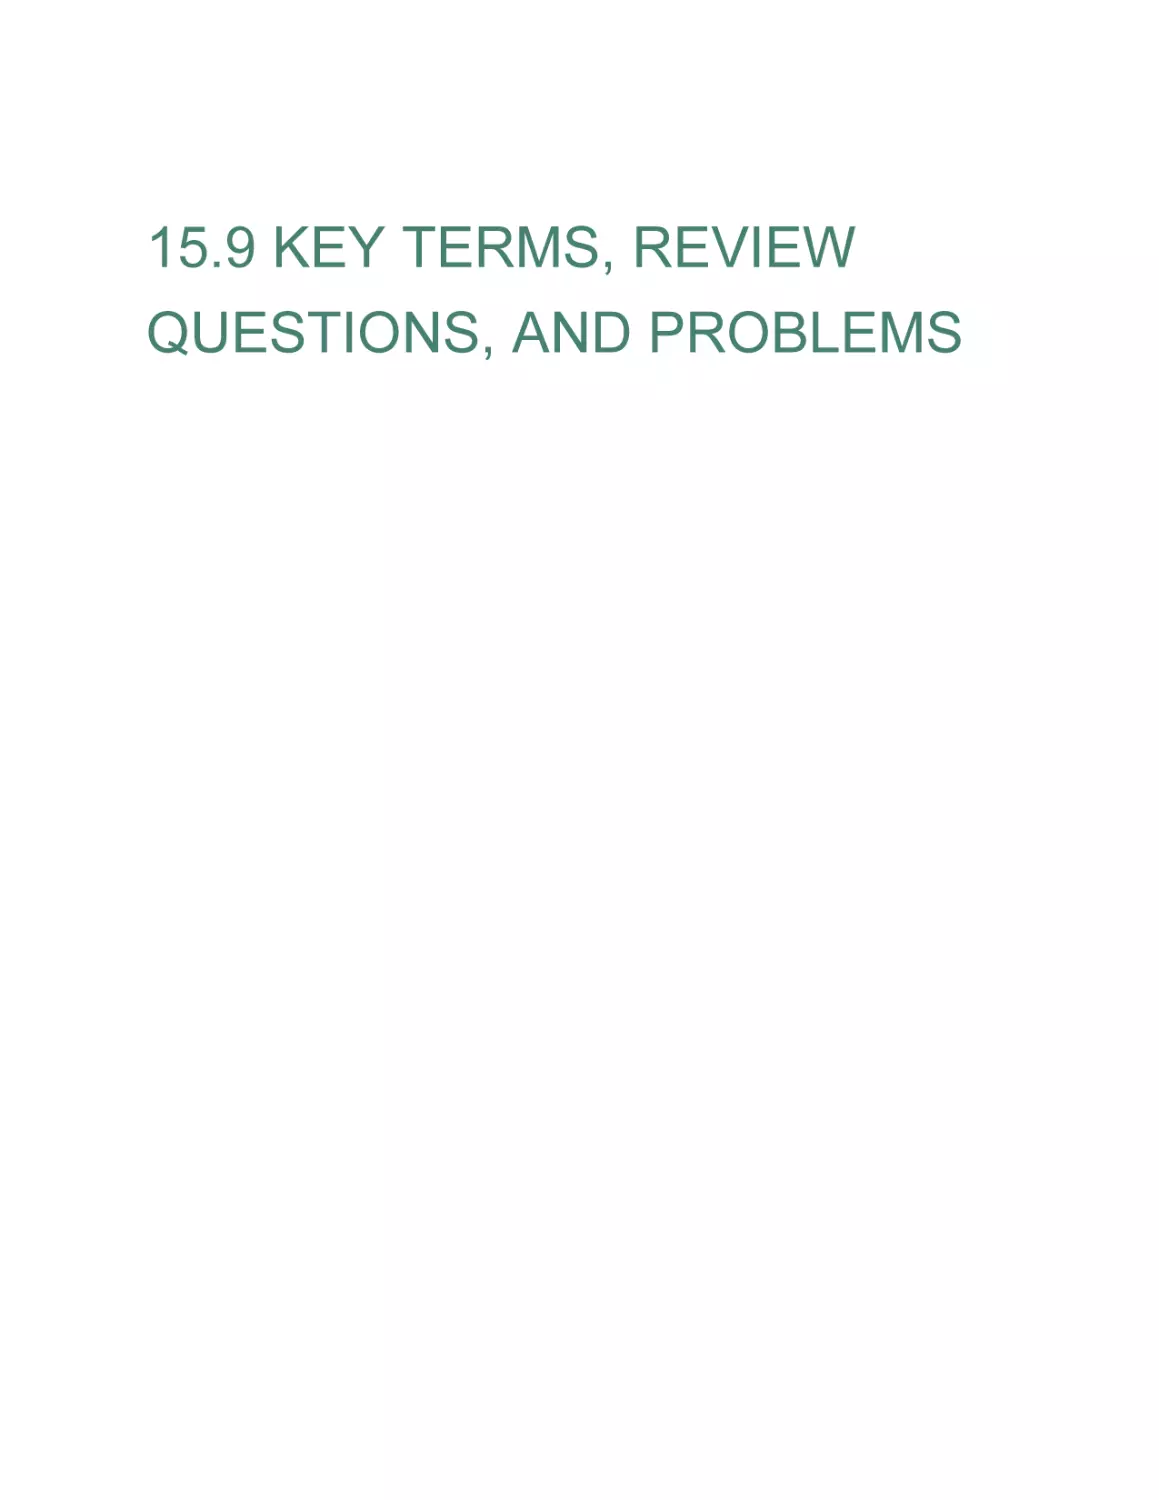 15.9 KEY TERMS, REVIEW QUESTIONS, AND PROBLEMS